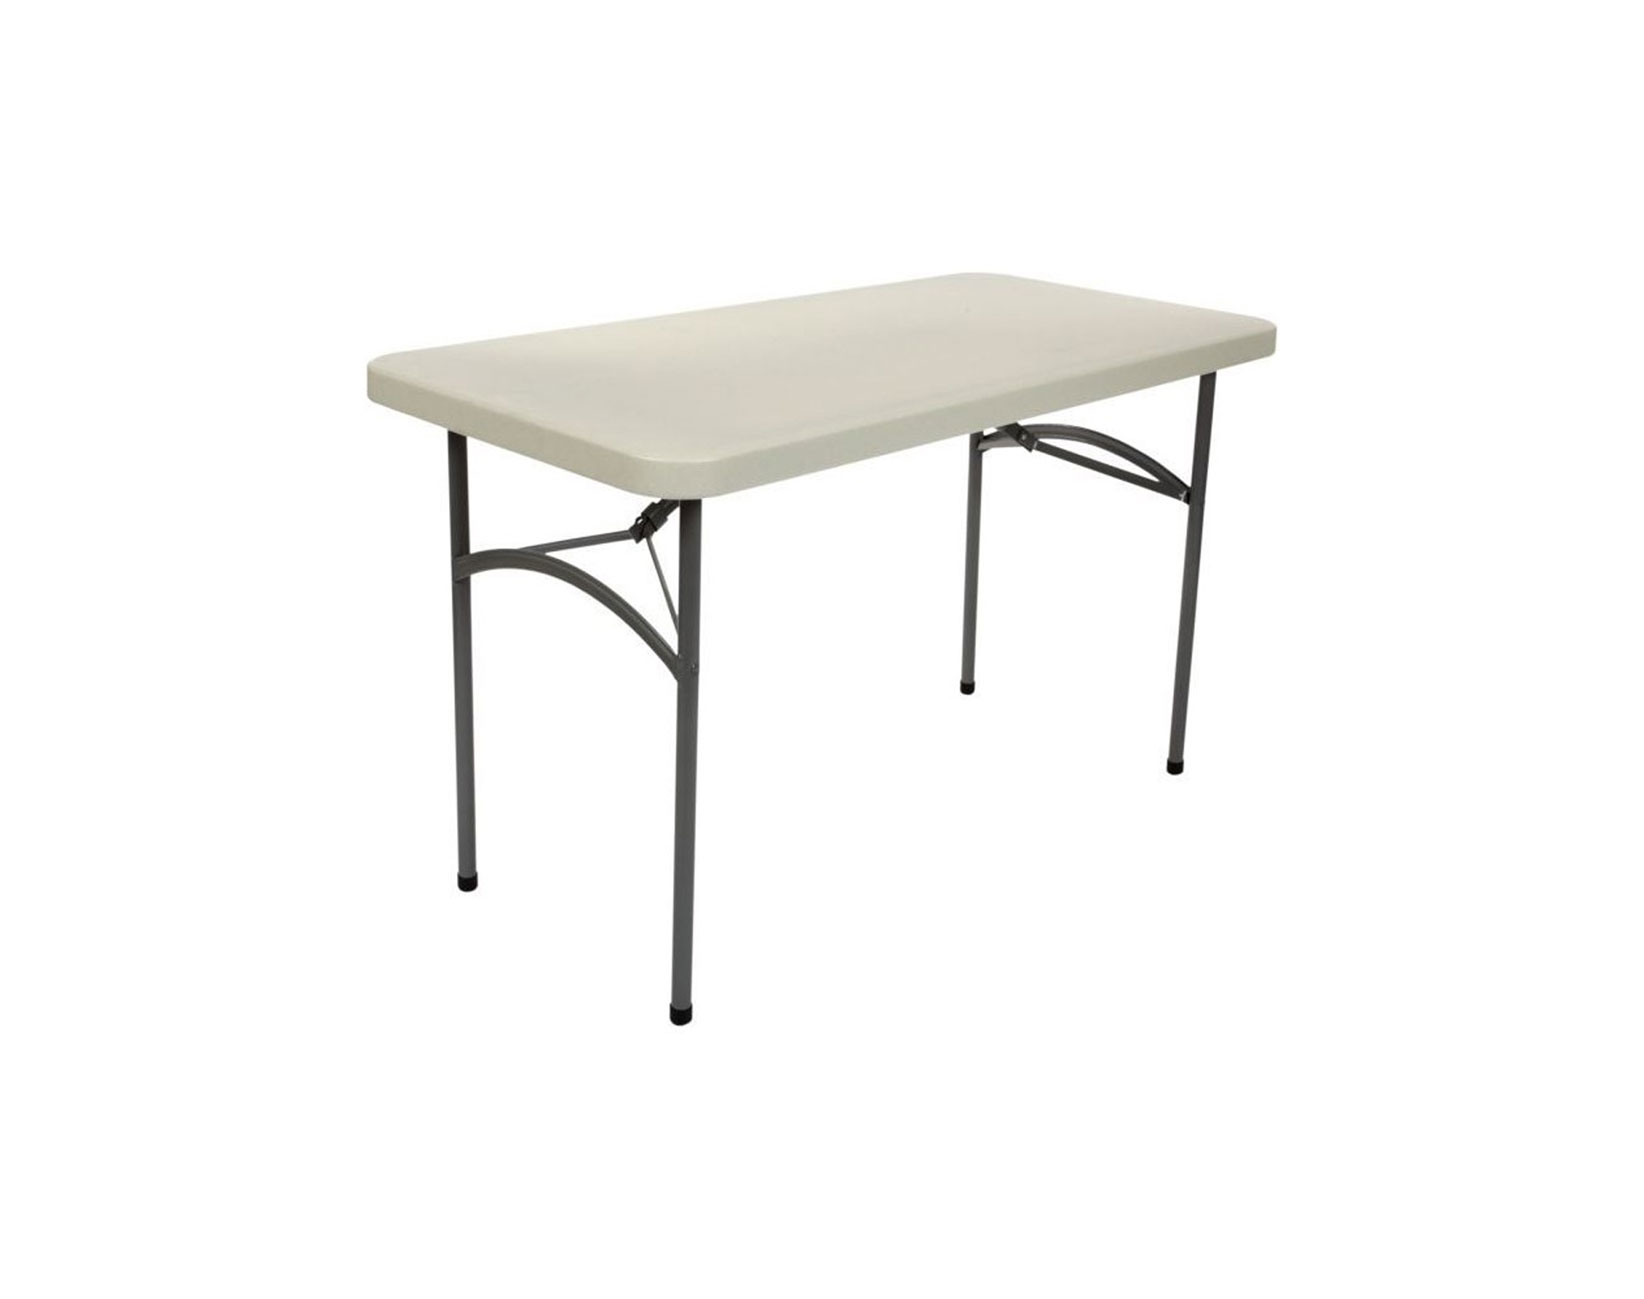 4' Tables